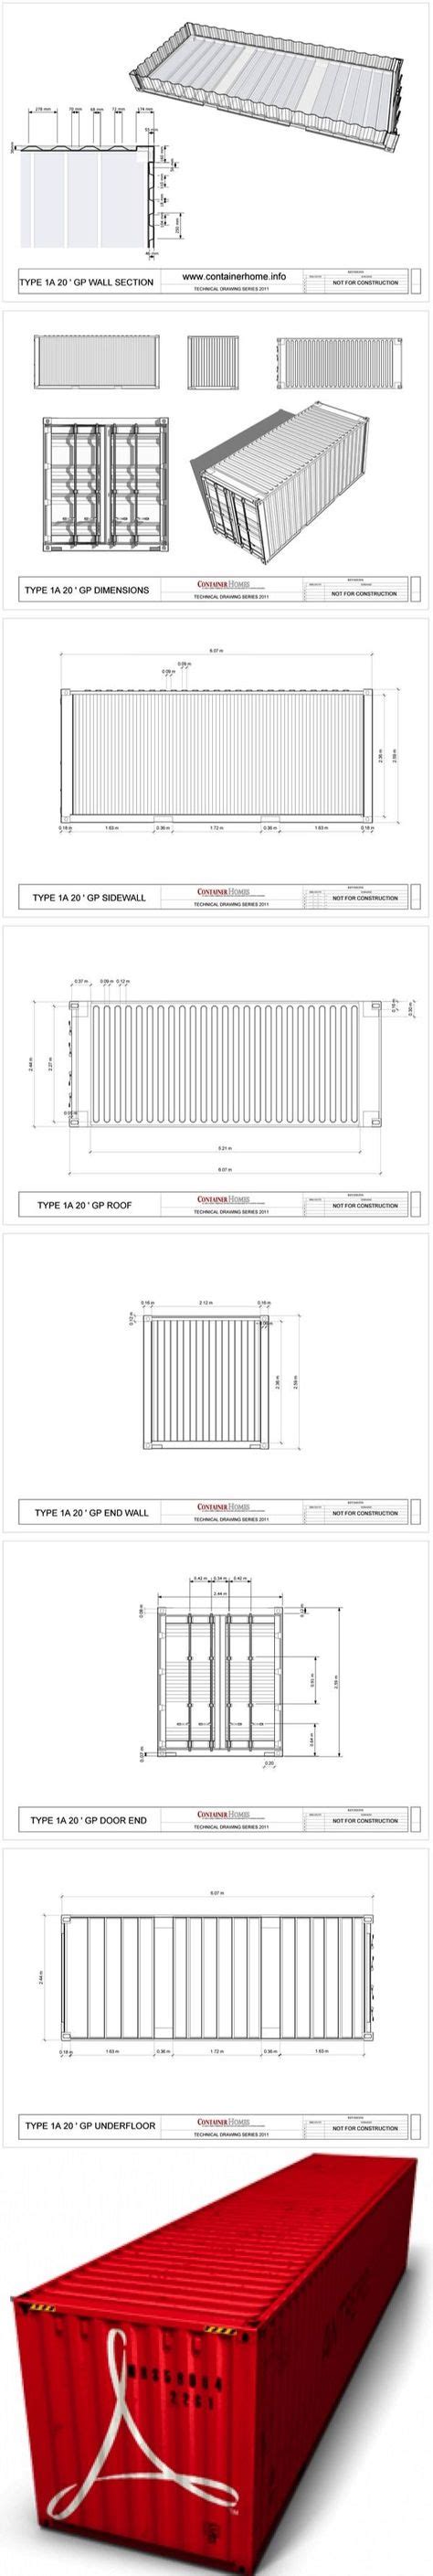 Free Shipping Container Technical Drawing Package With Images